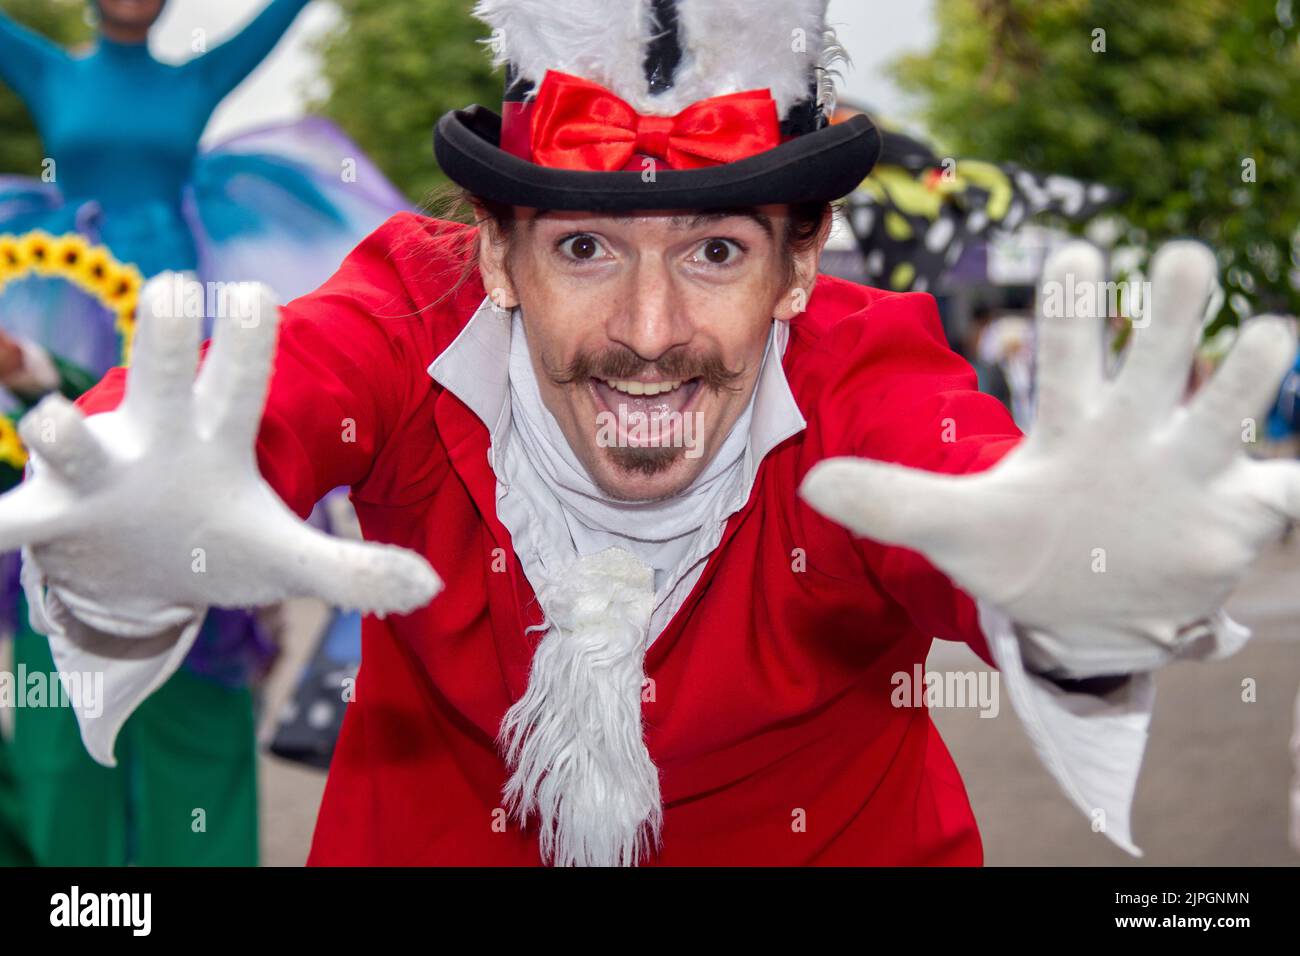 Southport Flower Show, Merseyside, UK. 17th Aug 2022:   Greeters, Promotion staff & entertainers at the largest independent flower show in England, which is expecting thousands of visitors over the four-day event as it opened today after a two-year Covid closure.  Credit: MediaWorld Images/Alamy Live News Stock Photo